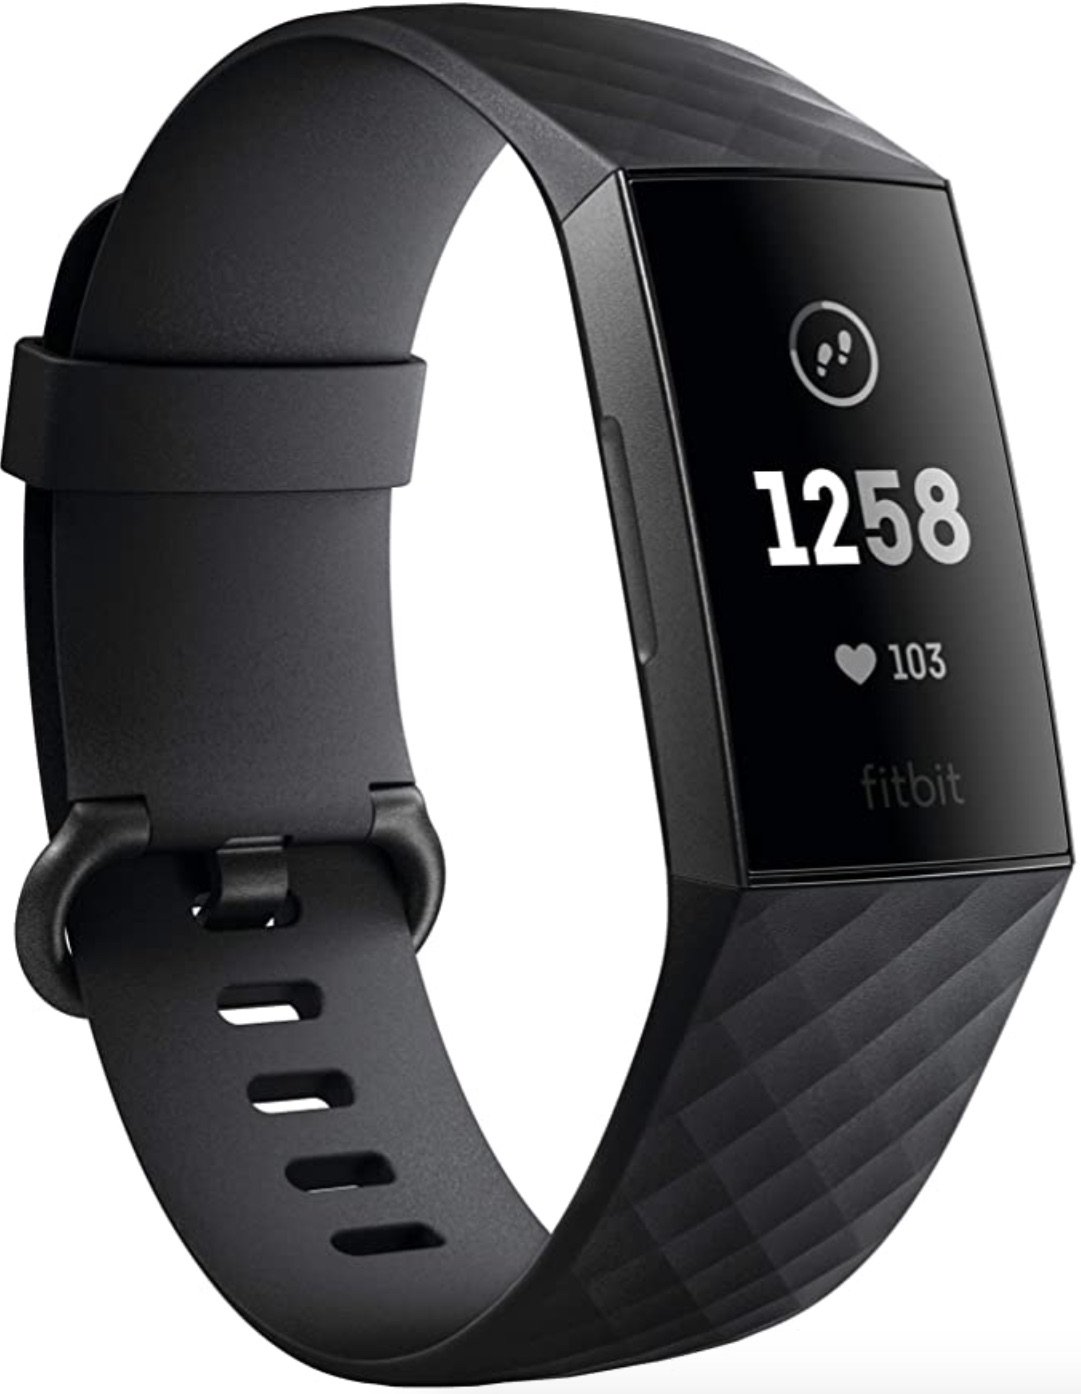 what is the difference between fitbit 3 and 4